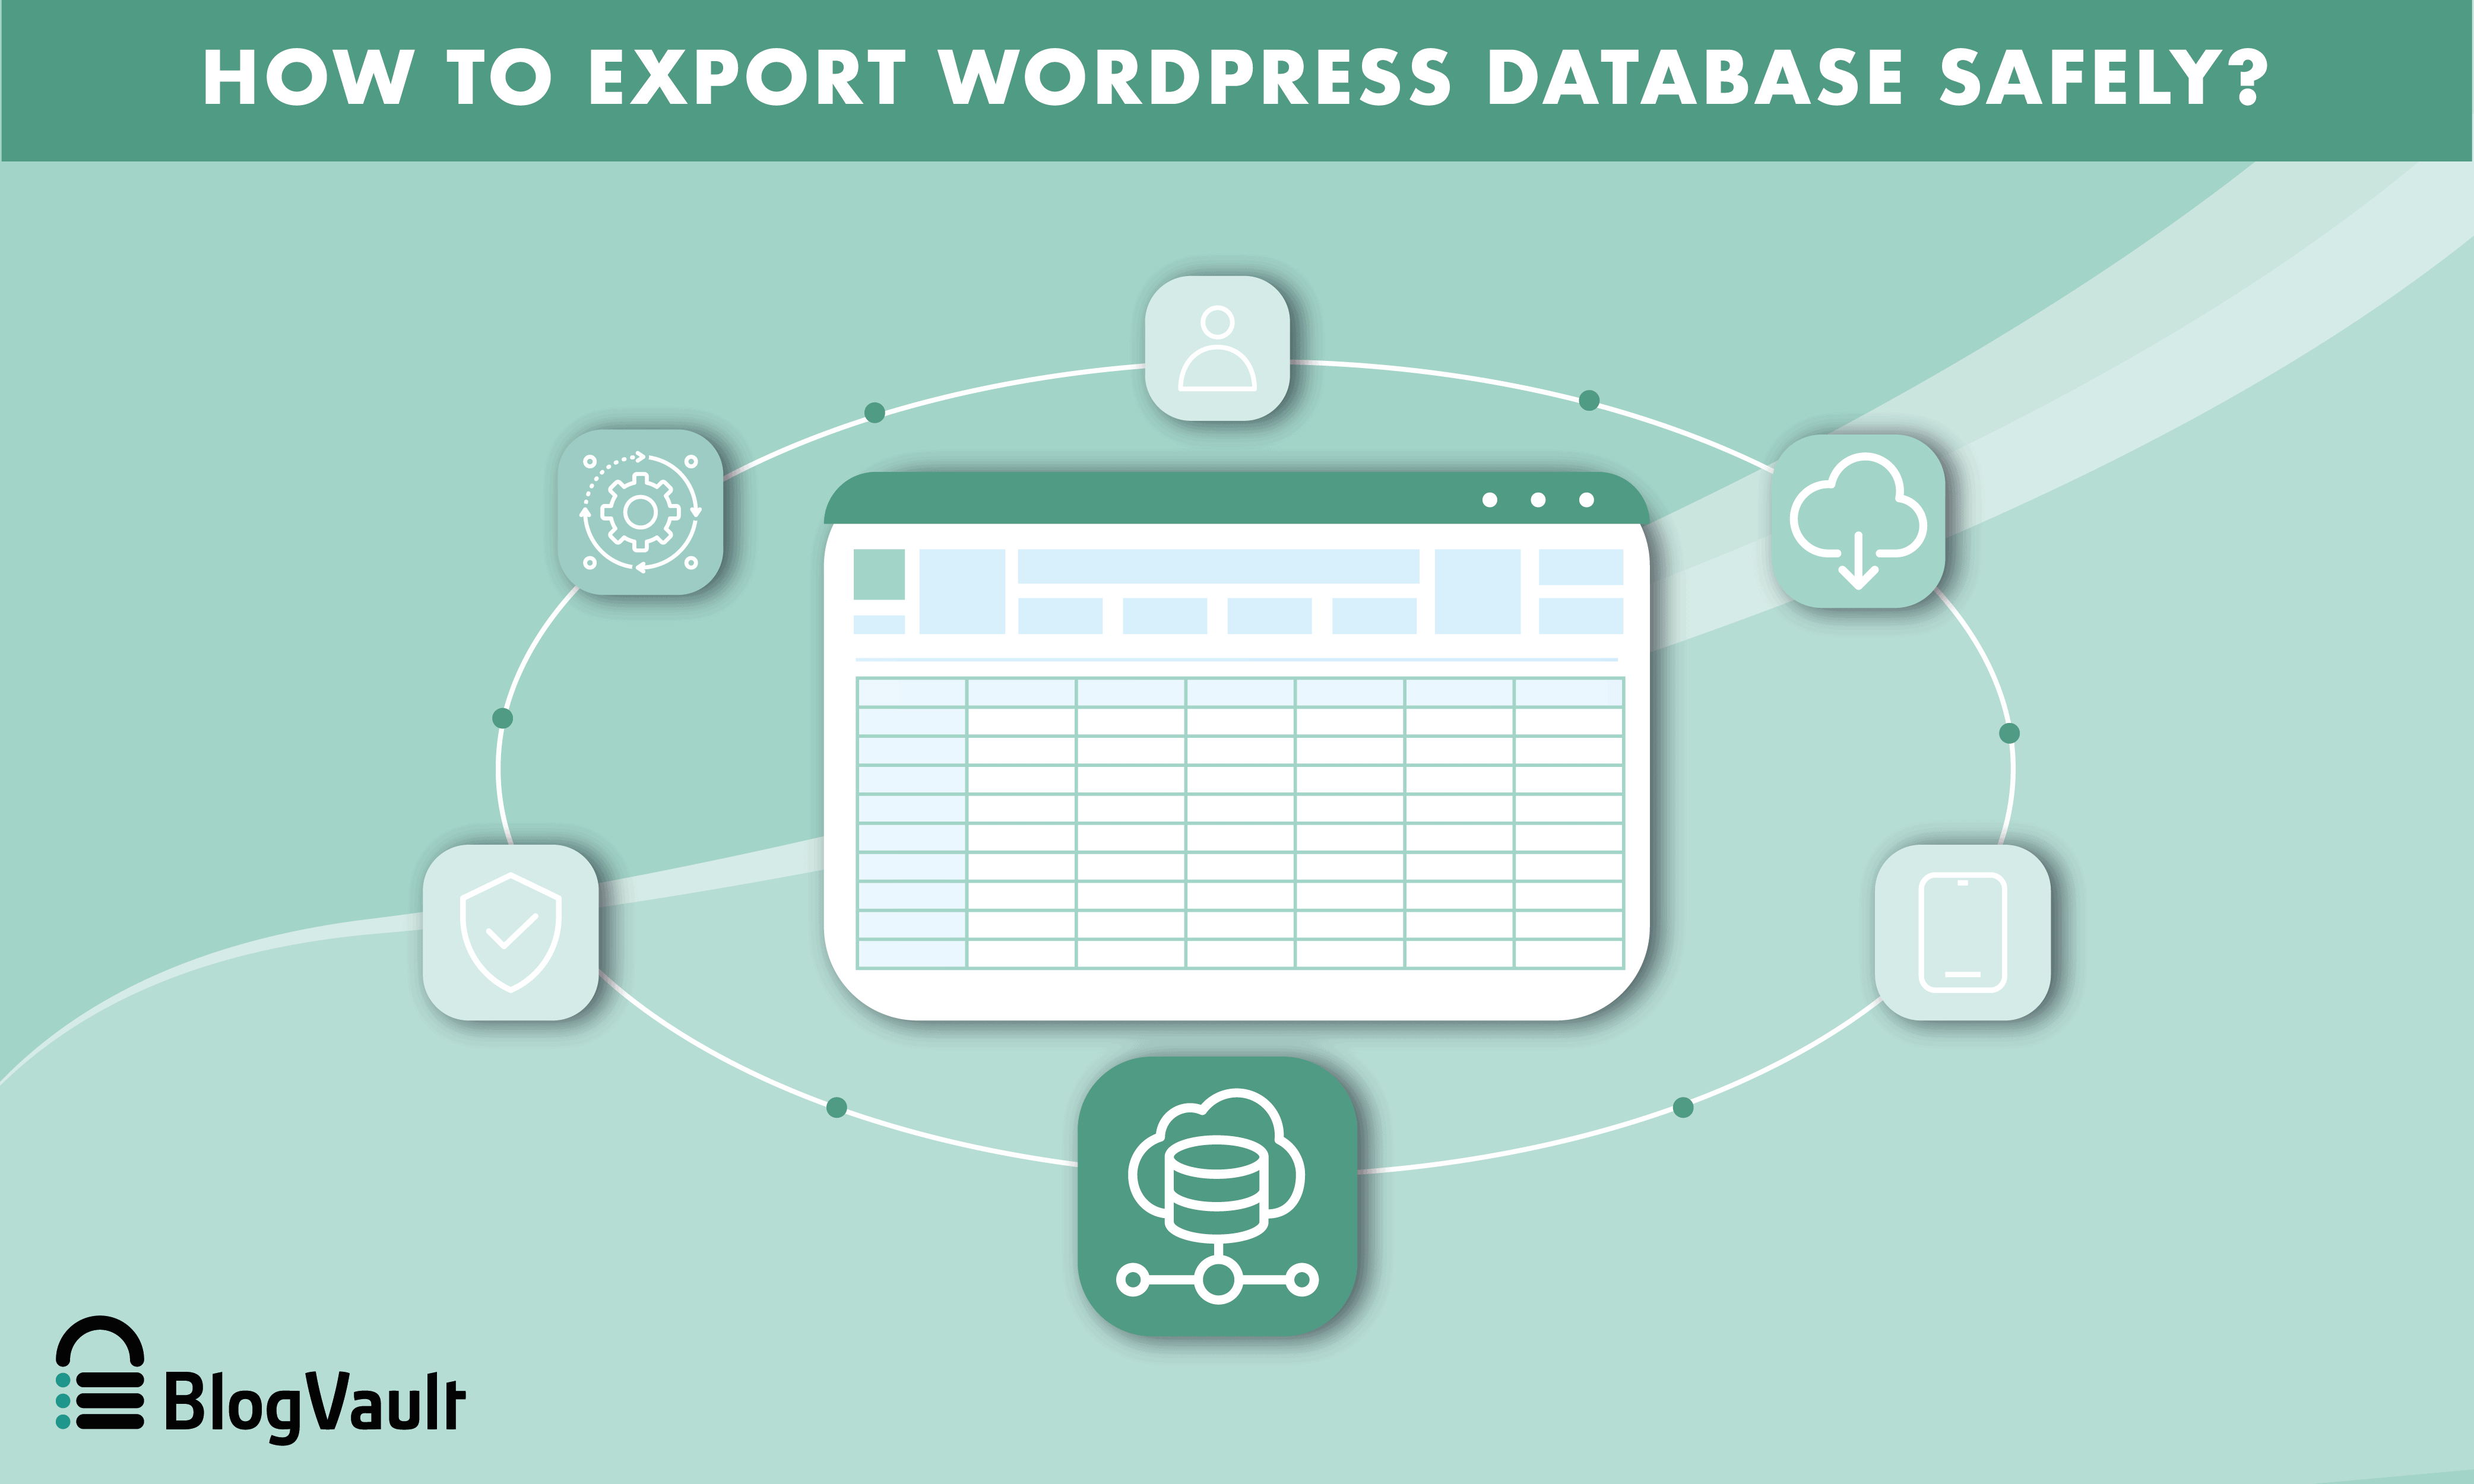 How to export WordPress database safely?